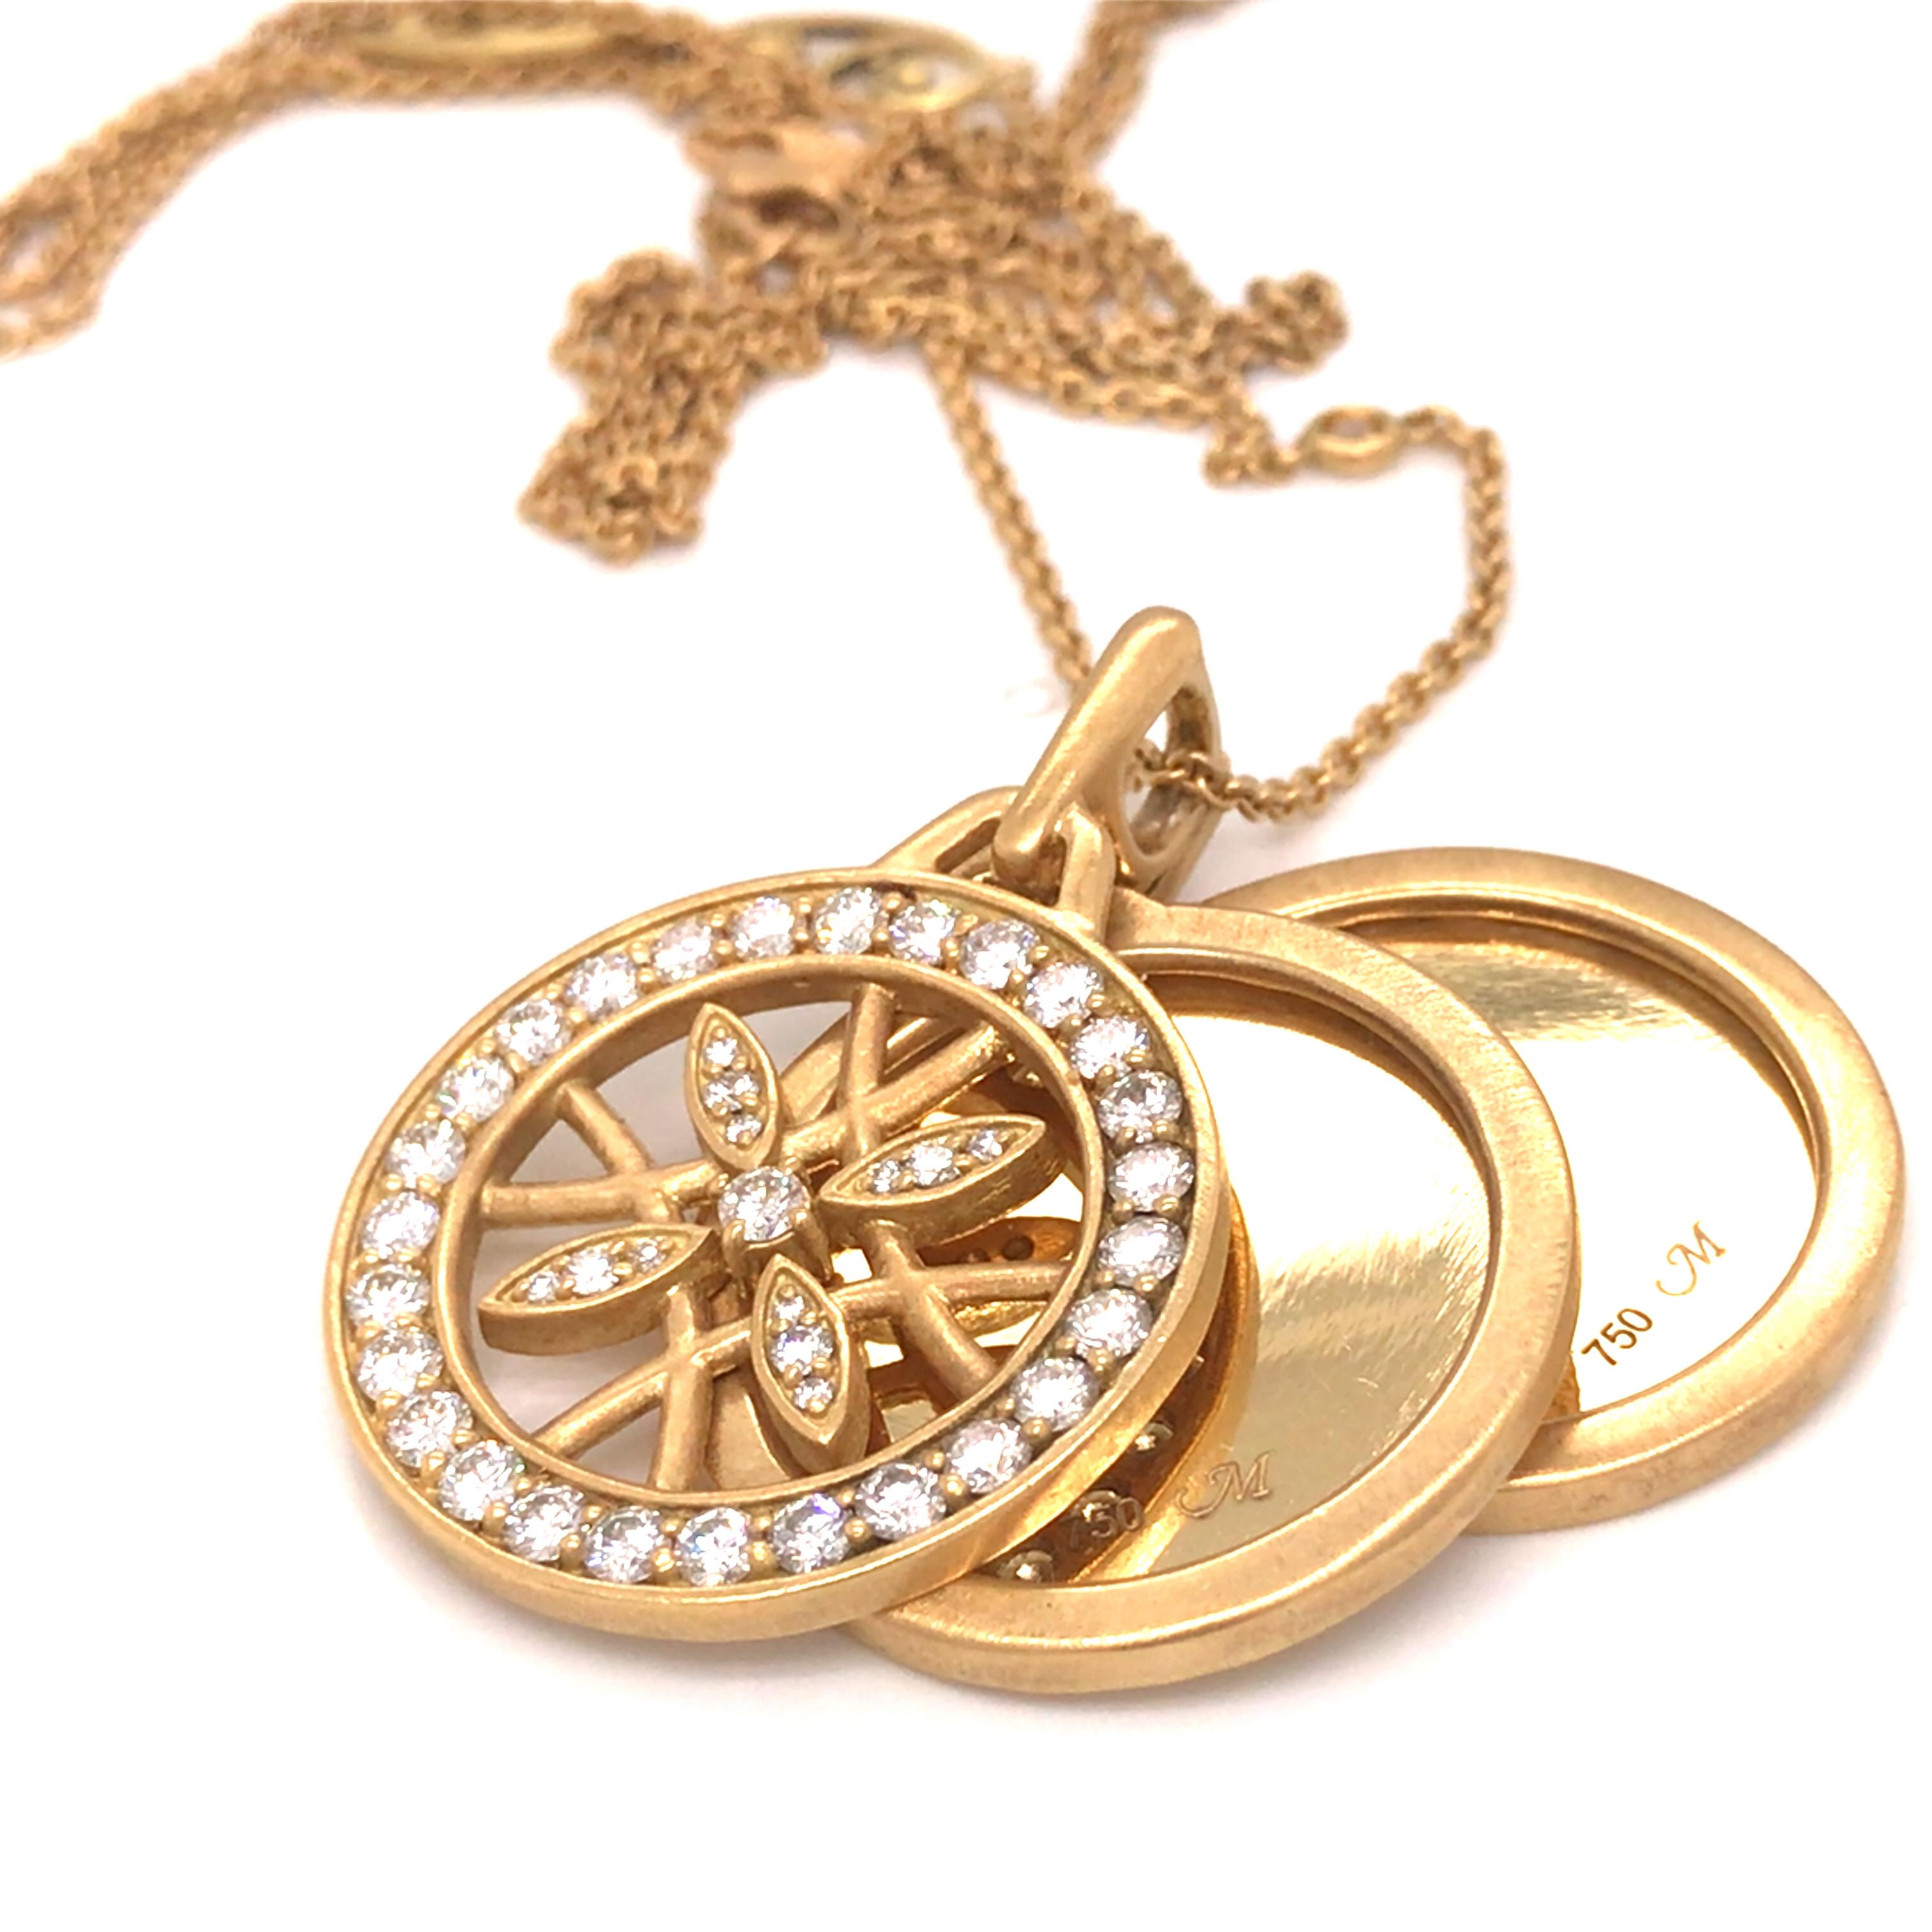 Vintage Stackable Diamond Locket Pendant Station Necklace in 18K Yellow Gold.  Round Brilliant Cut Diamonds weighing 2.03 carat total weight, G-H in color and VS in clarity are expertly set.  The Necklace measures 27 inch in length, the pendant